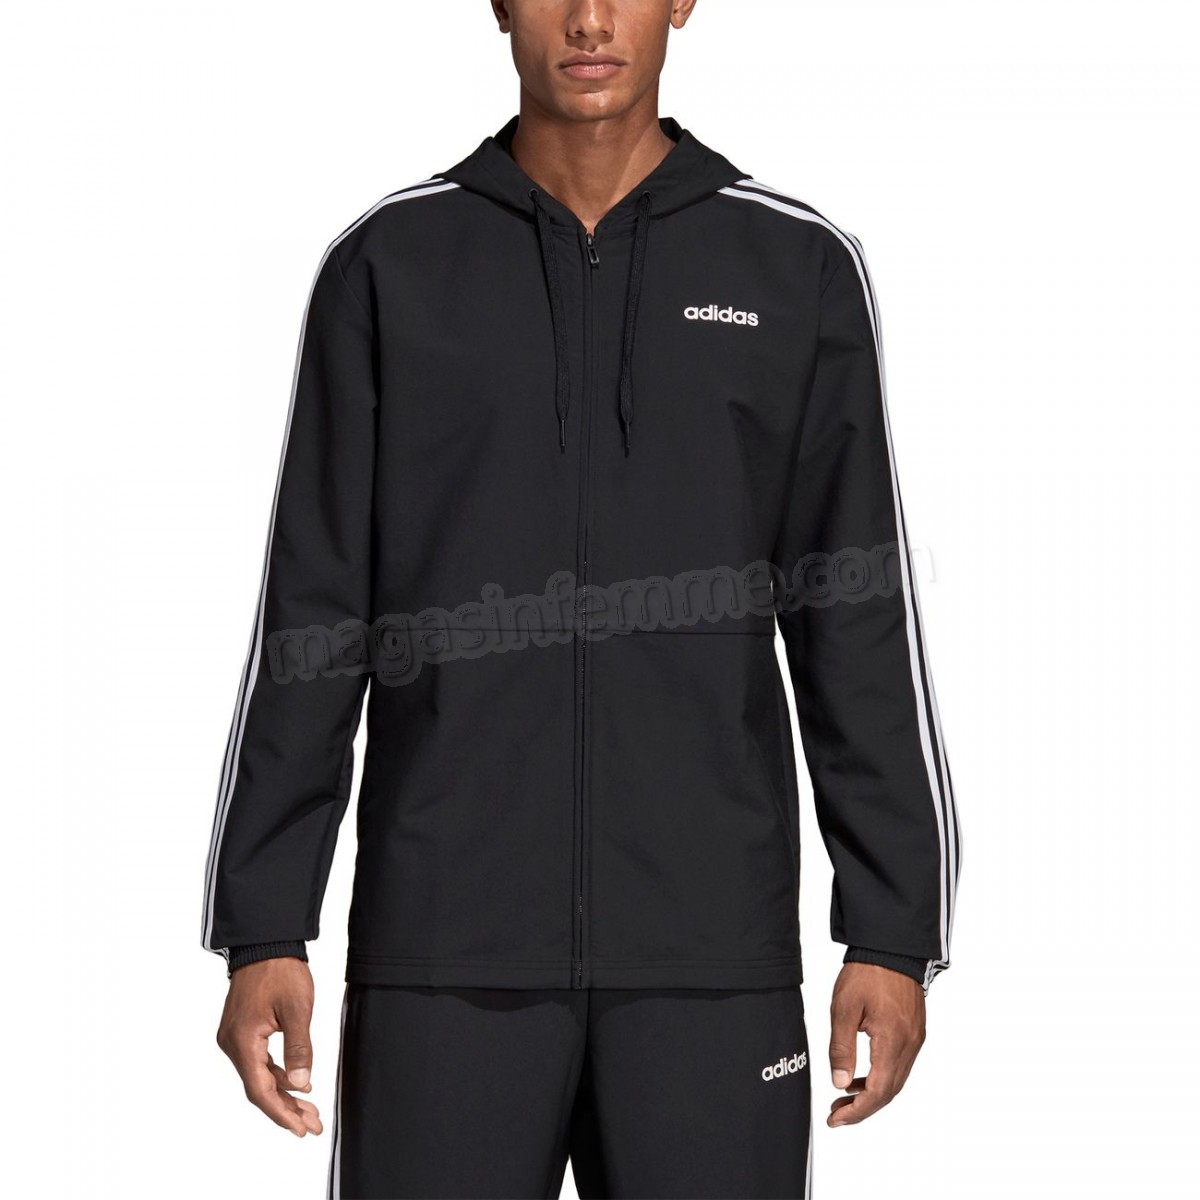 Adidas-Fitness homme ADIDAS Coupe-vent adidas Essentials 3-bandes Woven en solde - -4